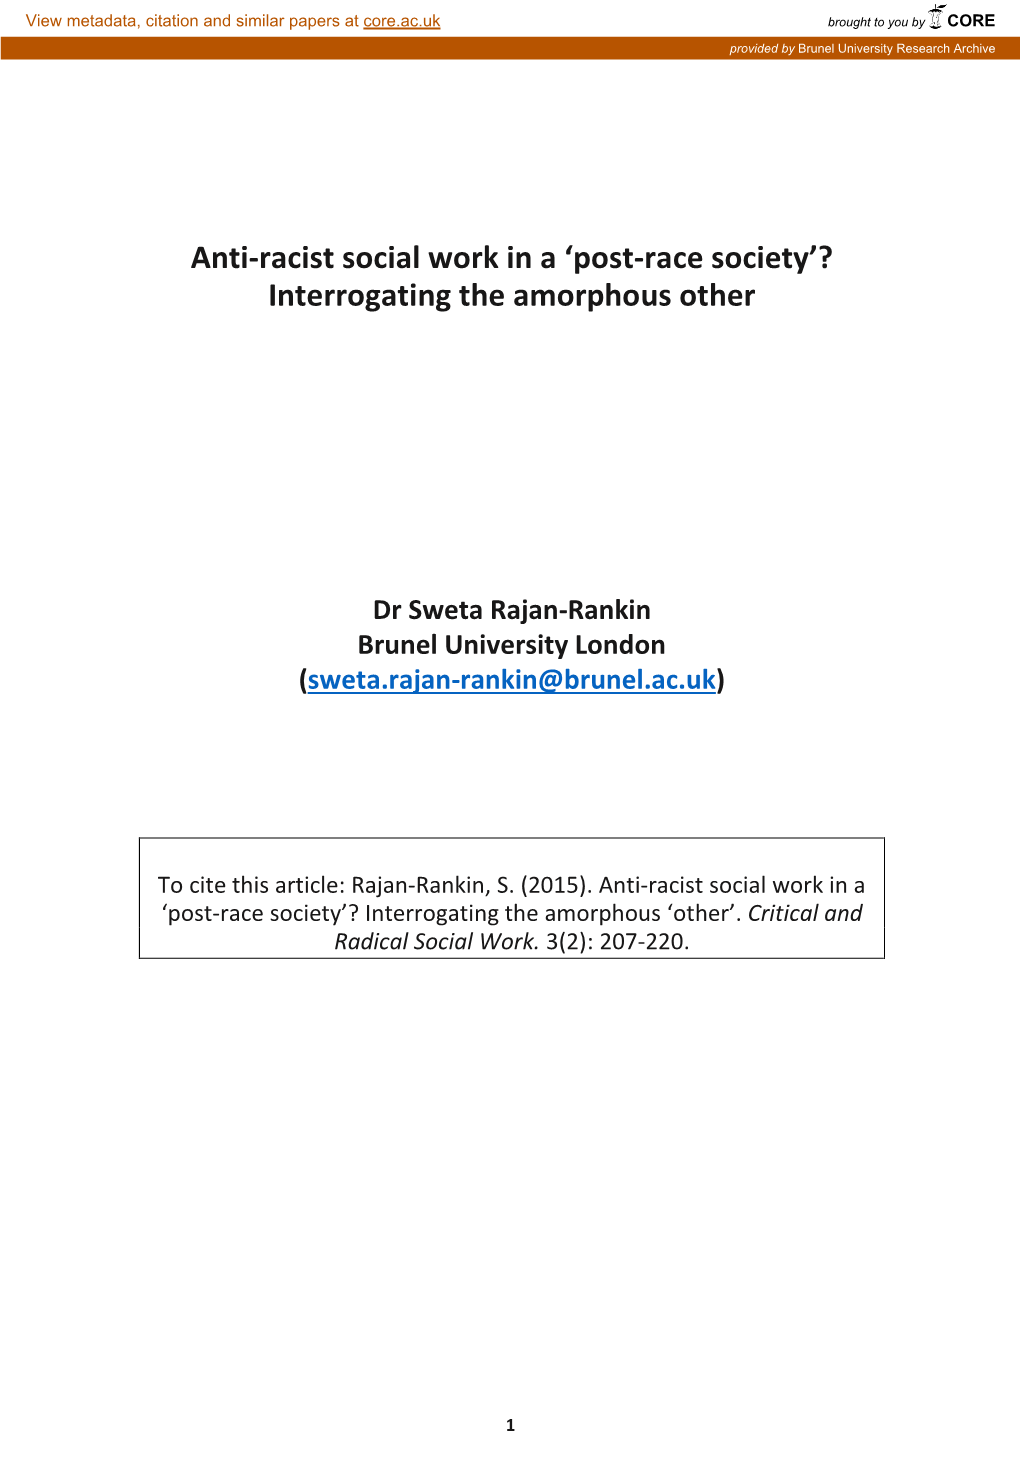 Anti-Racist Social Work in a ‘Post-Race Society’? Interrogating the Amorphous Other